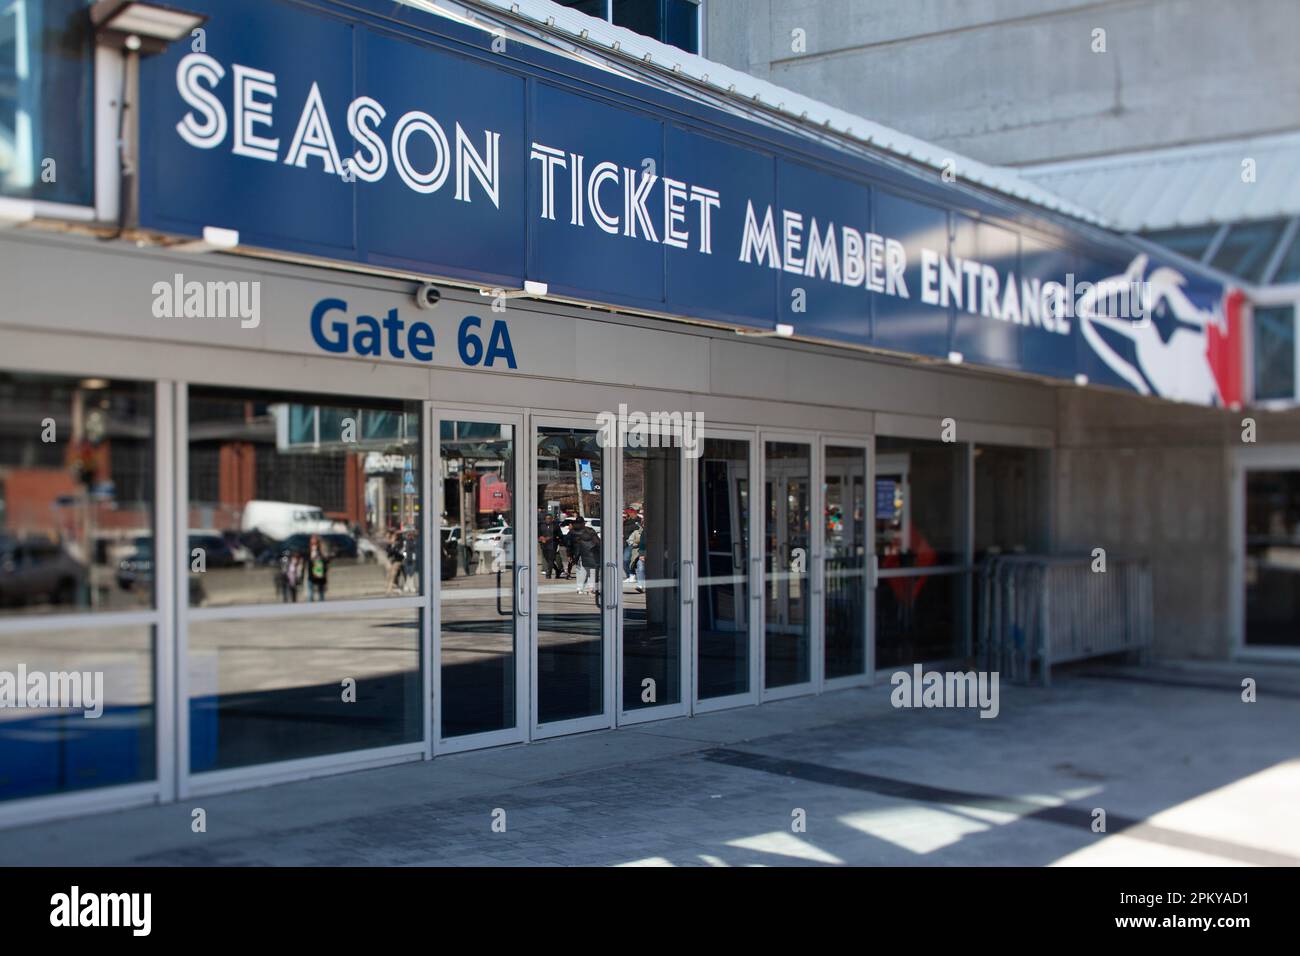 Blue Jays tseason ticket member entrance at Rogers center in Toronto. The Toronto Blue Jays are a Canadian professional baseball team based in Toronto Stock Photo